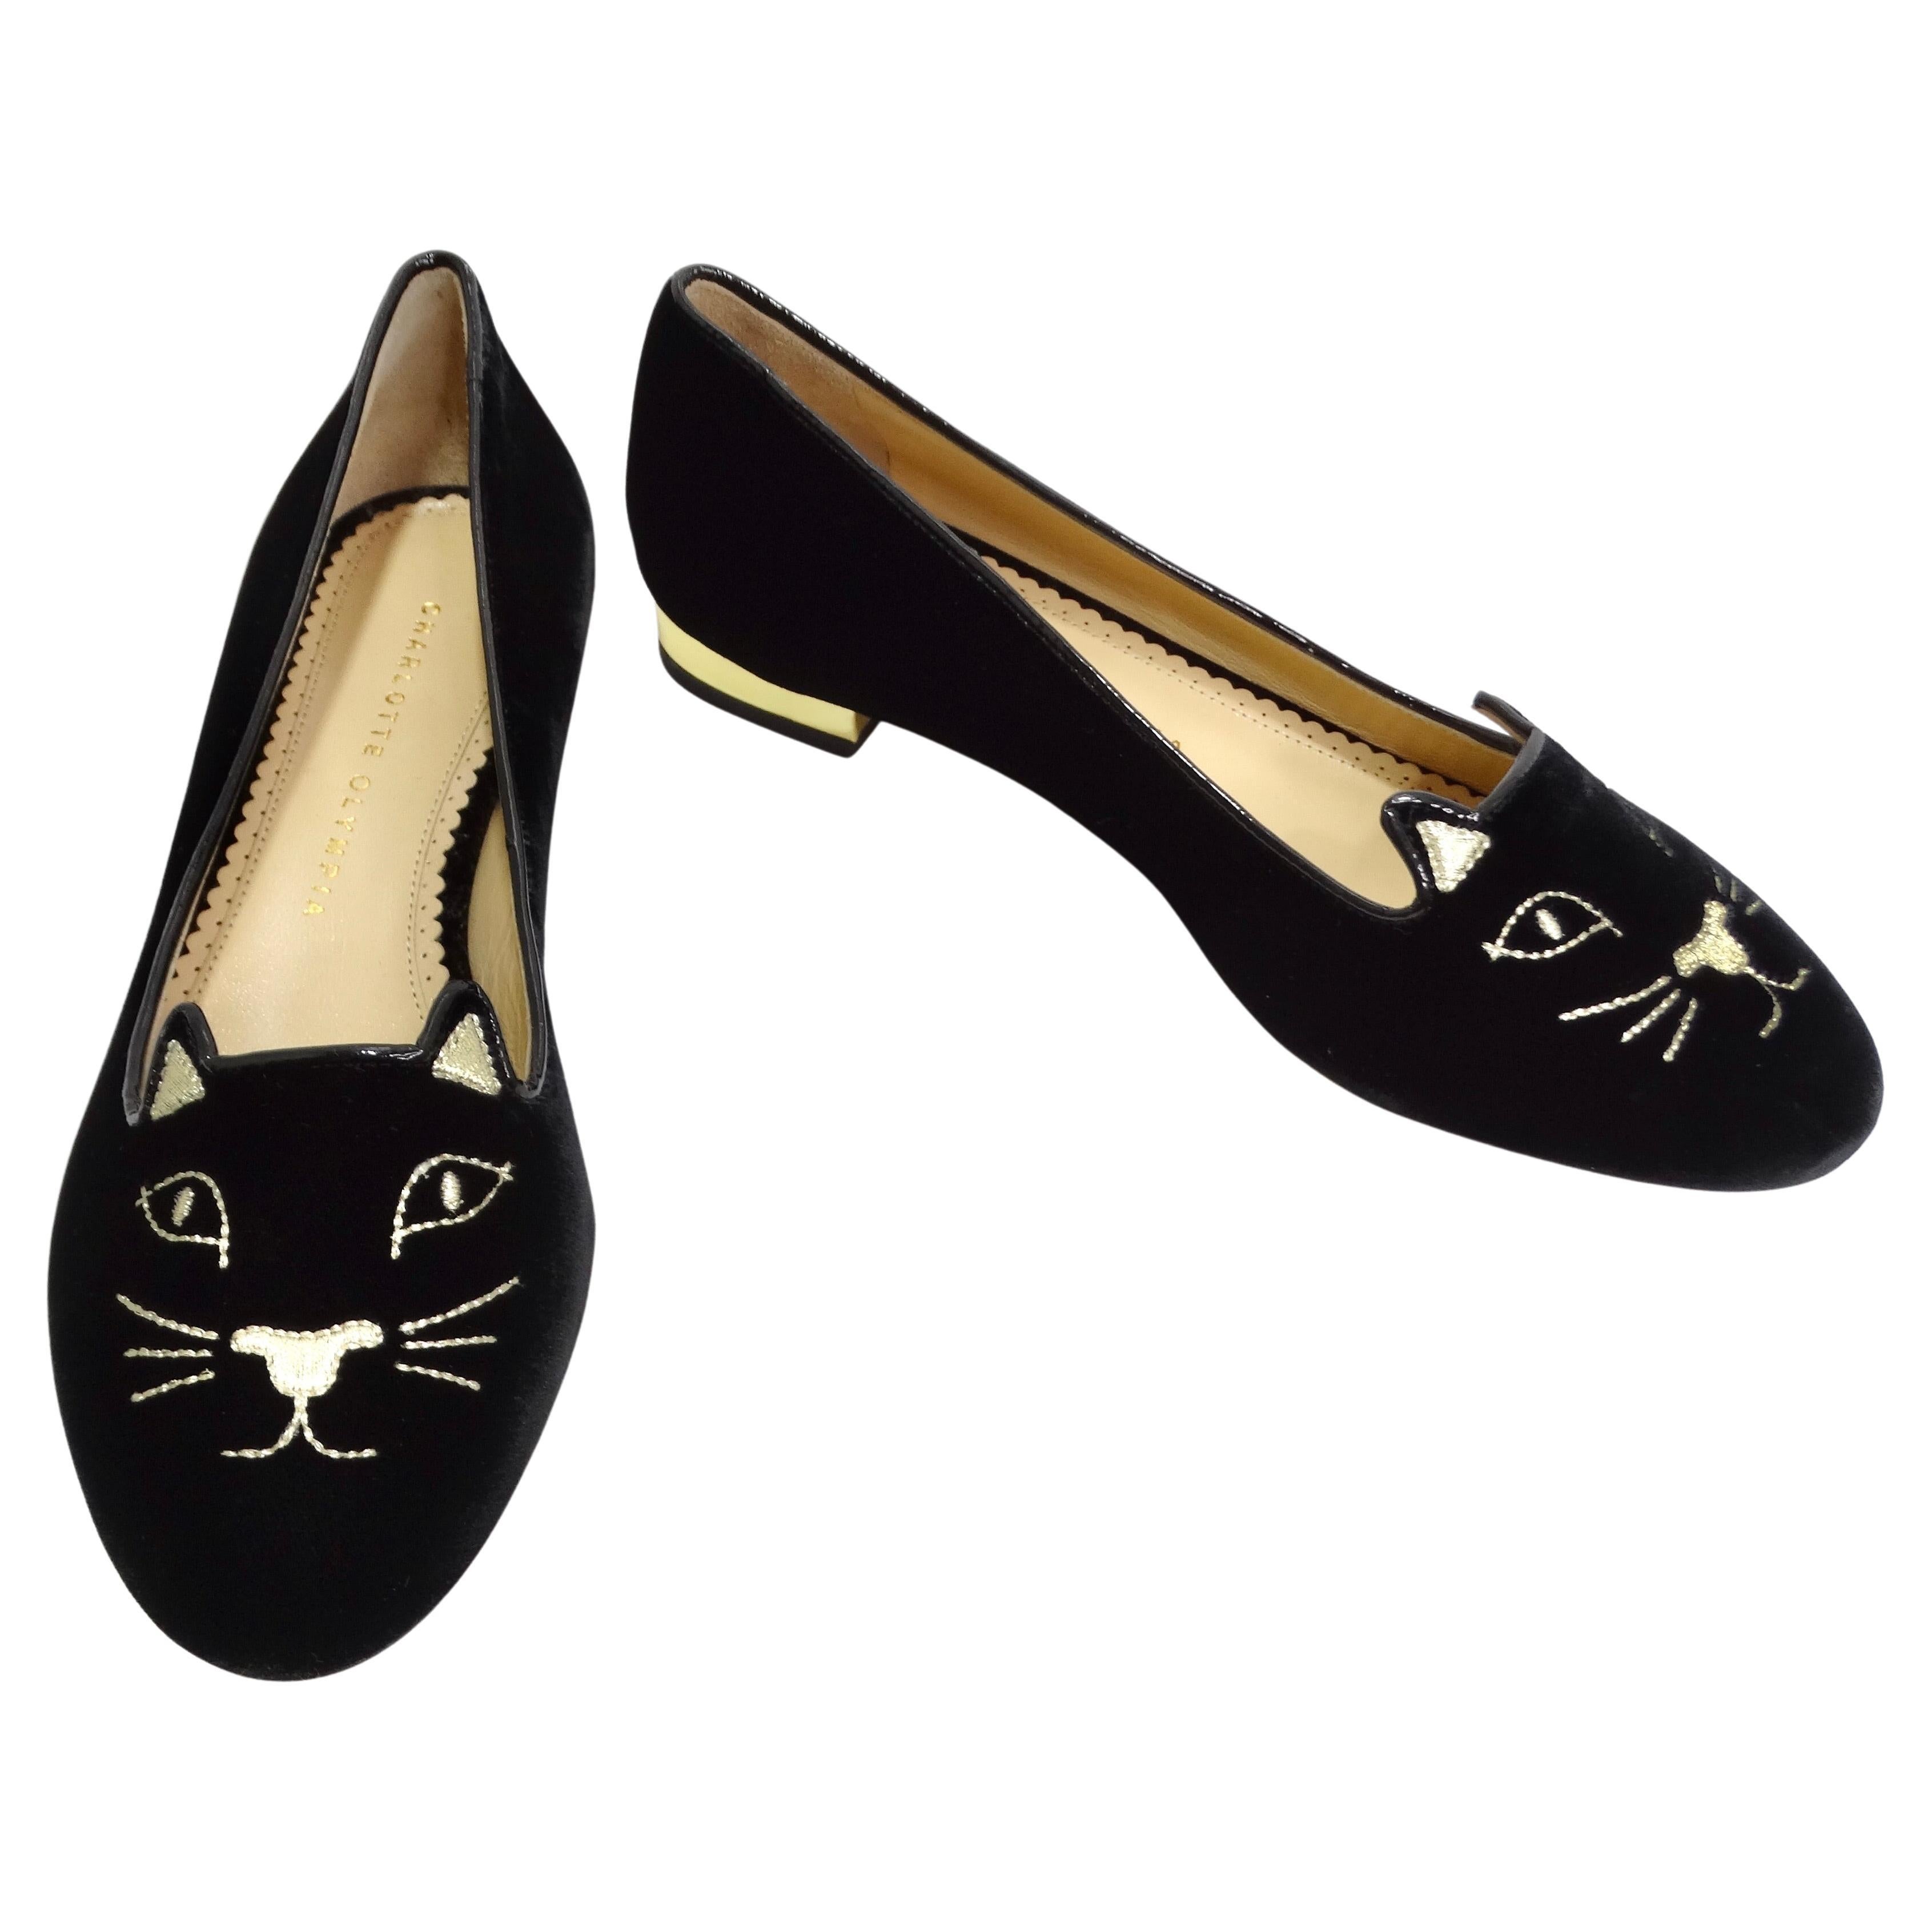 Charlotte Olympia - Chausssures brodées signées Kitty en vente